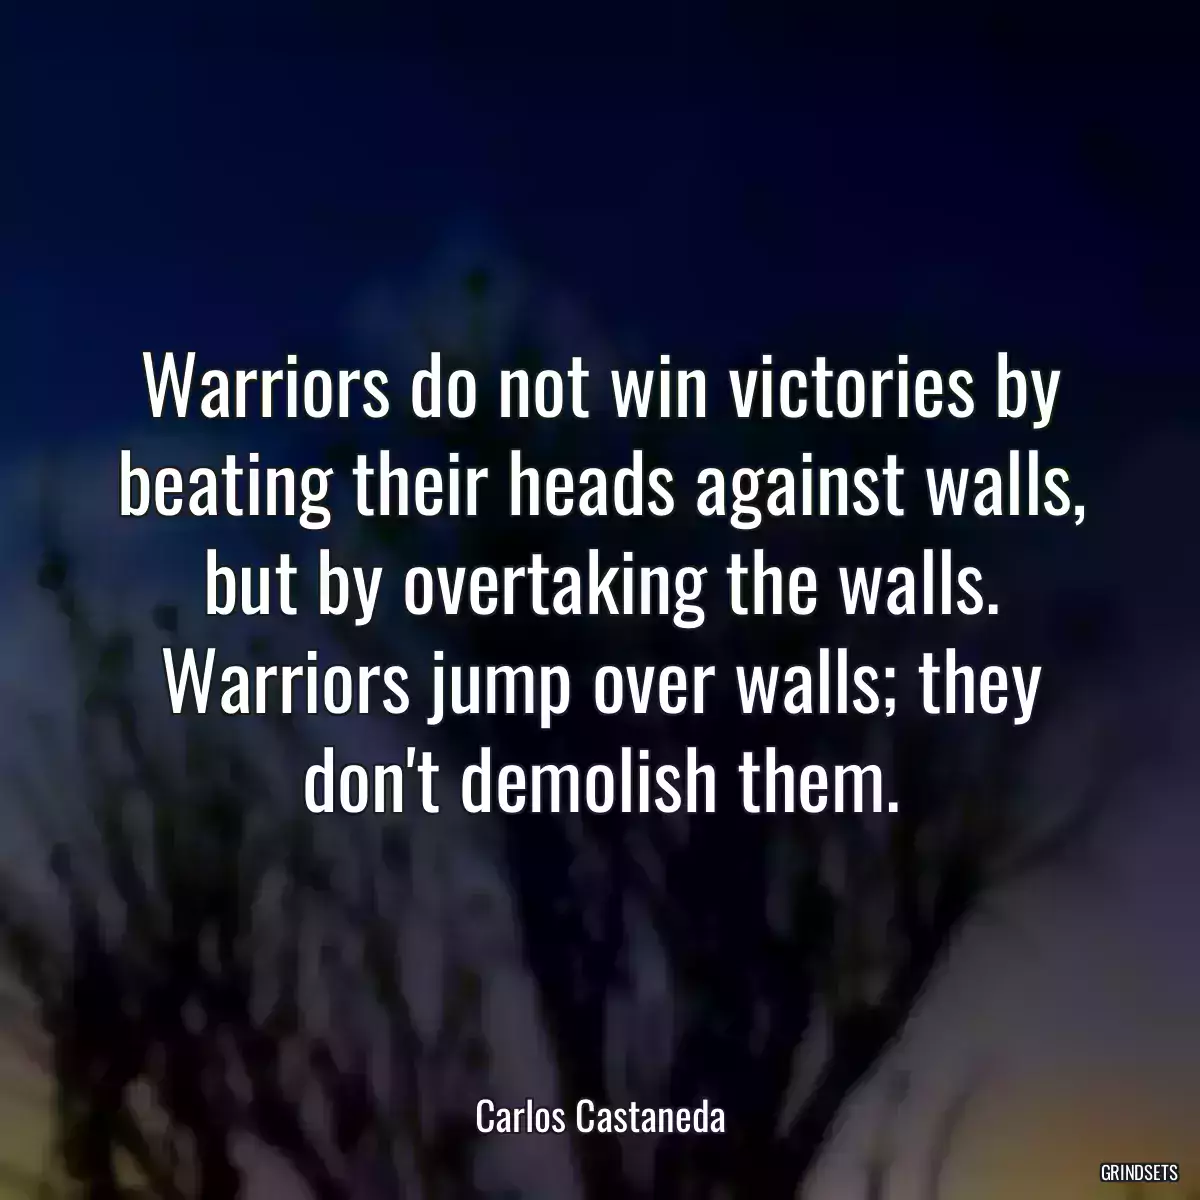 Warriors do not win victories by beating their heads against walls, but by overtaking the walls. Warriors jump over walls; they don\'t demolish them.